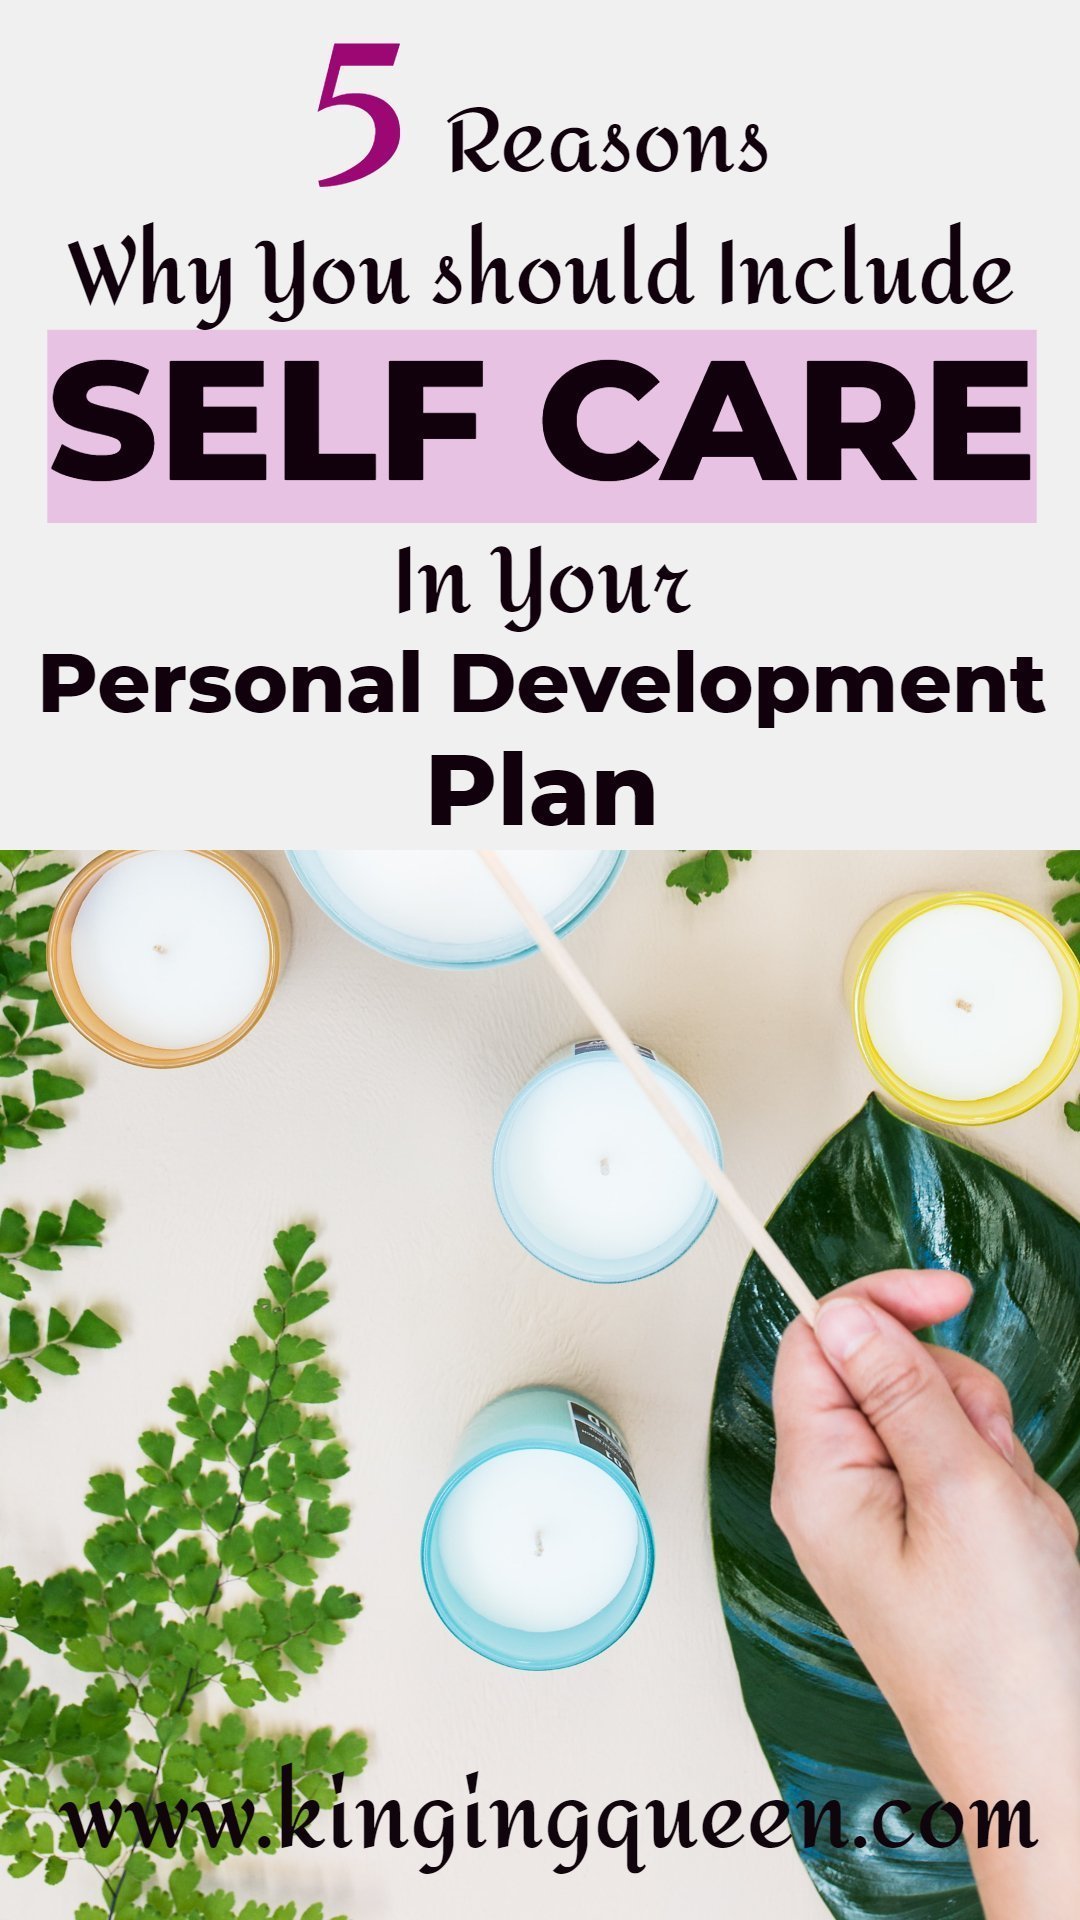 5 reasons why self care is important for personal development